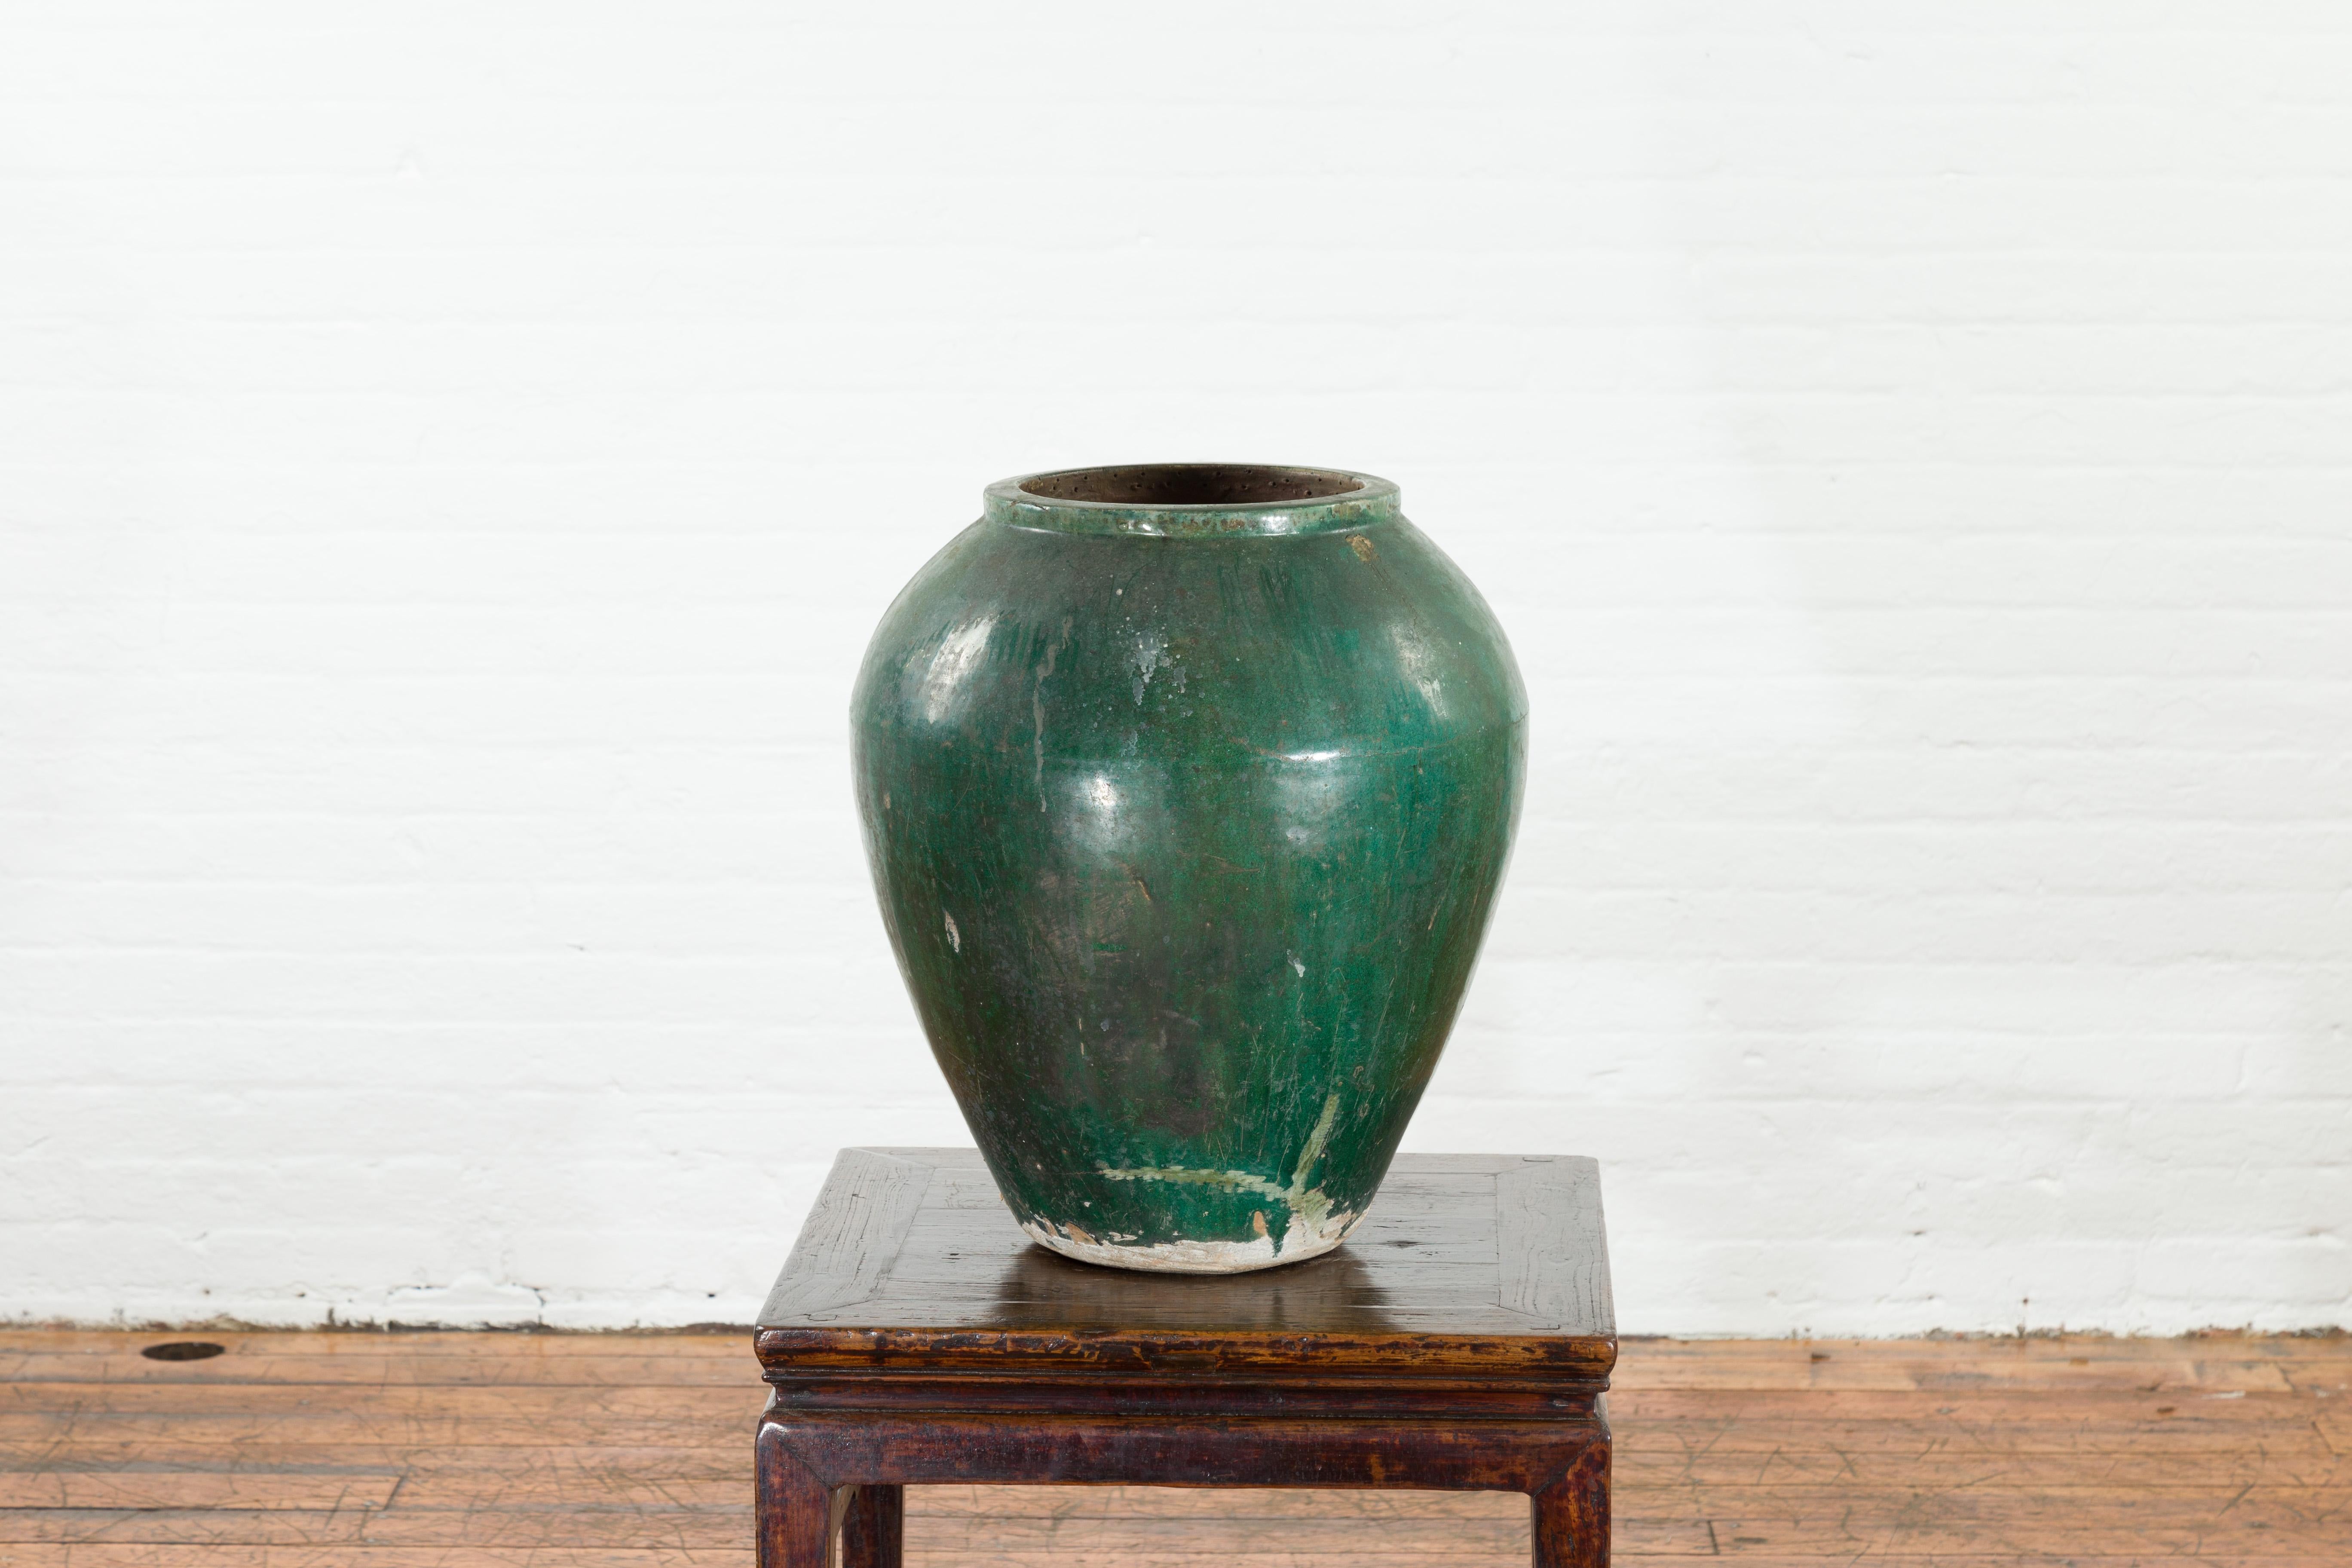 Ceramic Chinese Vintage Water Jar with Verde Patina and Weathered Appearance